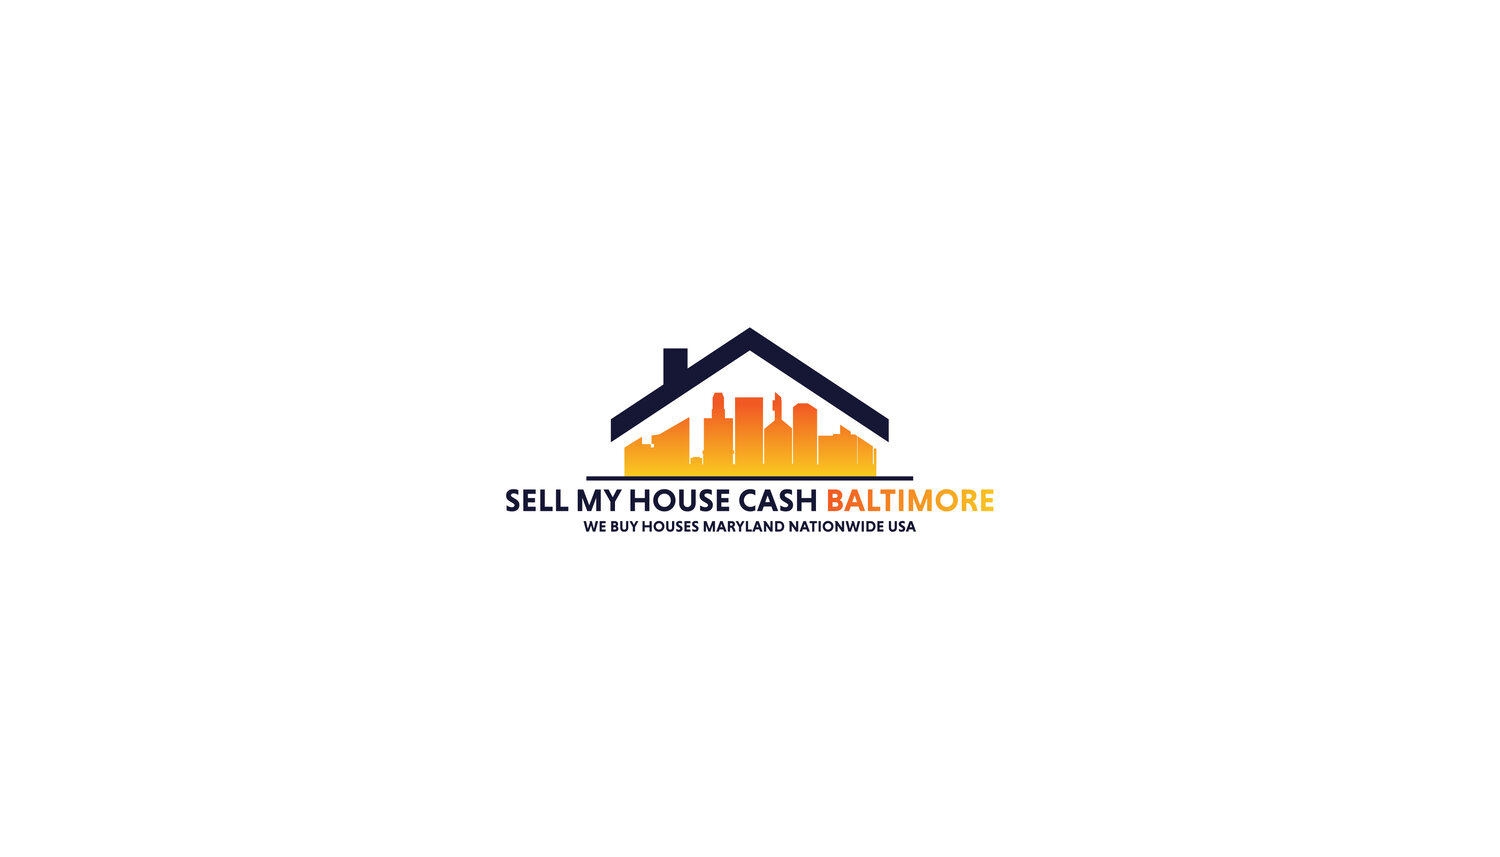 Sell My House Fast Baltimore | (410) 886-6966 | We Buy Houses Baltimore MD | Cash for Houses Ugly